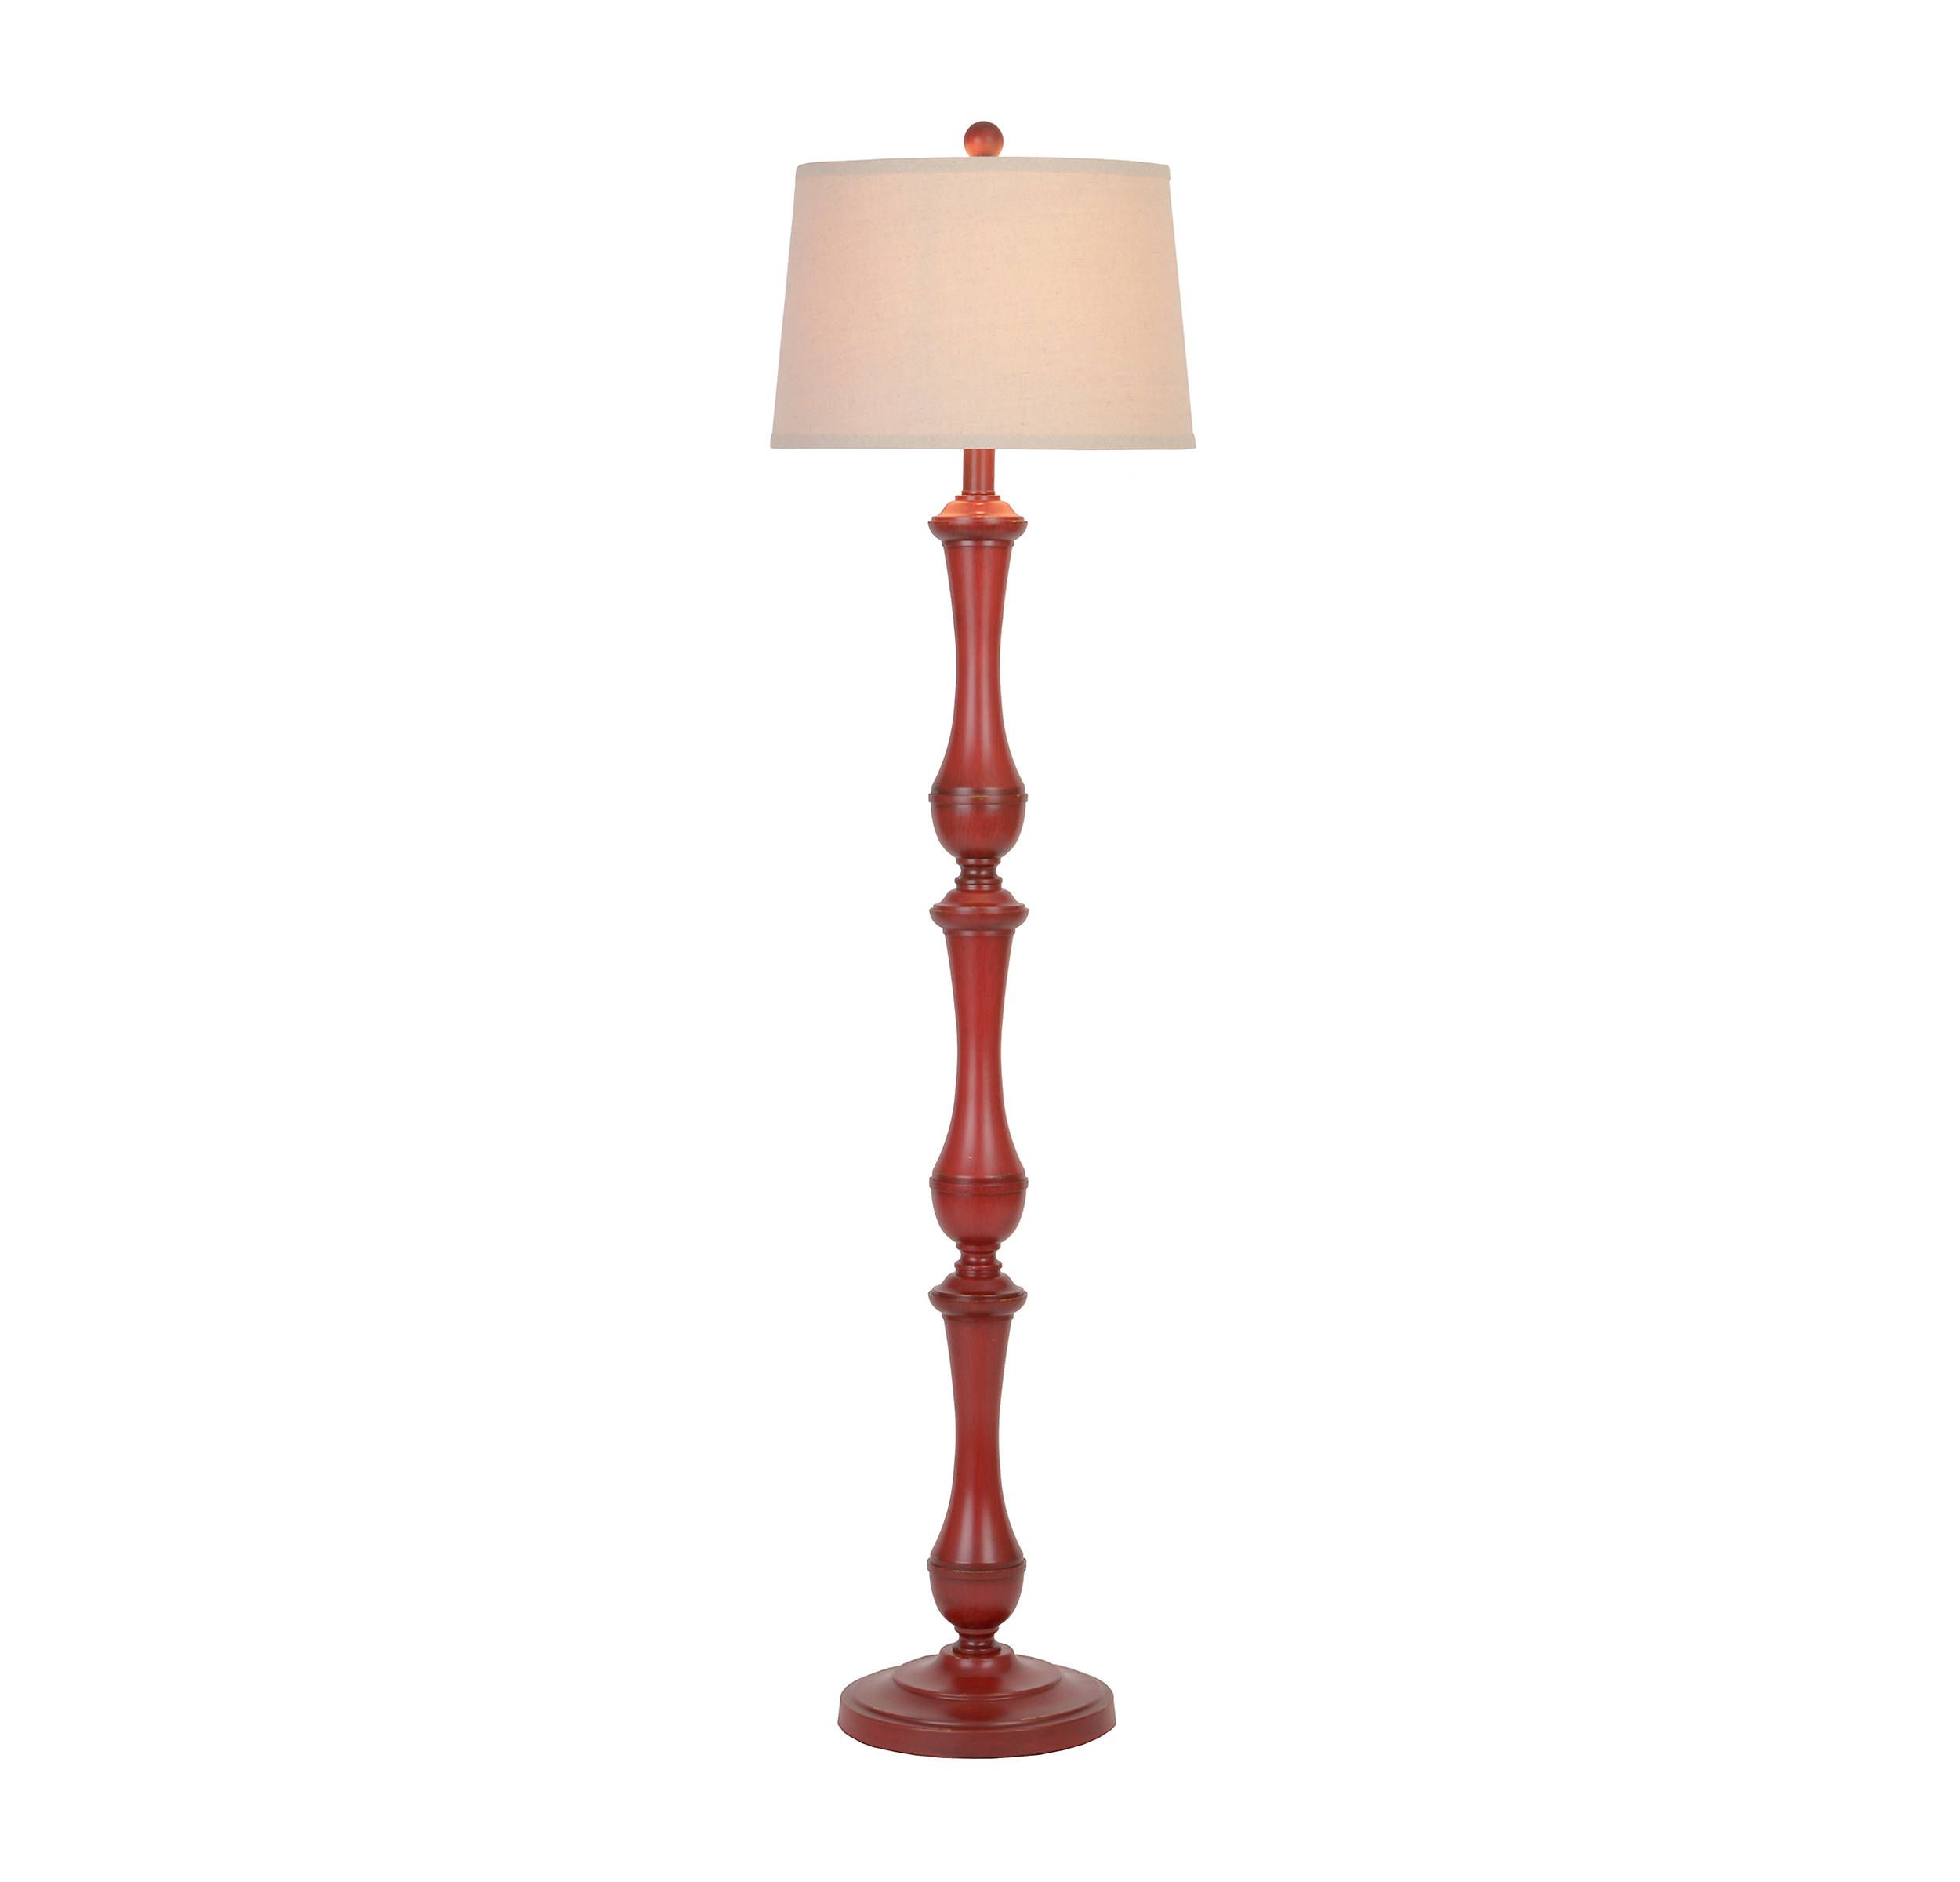 Product Details Hadley Red Spindle Floor Lamp In 2019 Red regarding dimensions 2500 X 2400